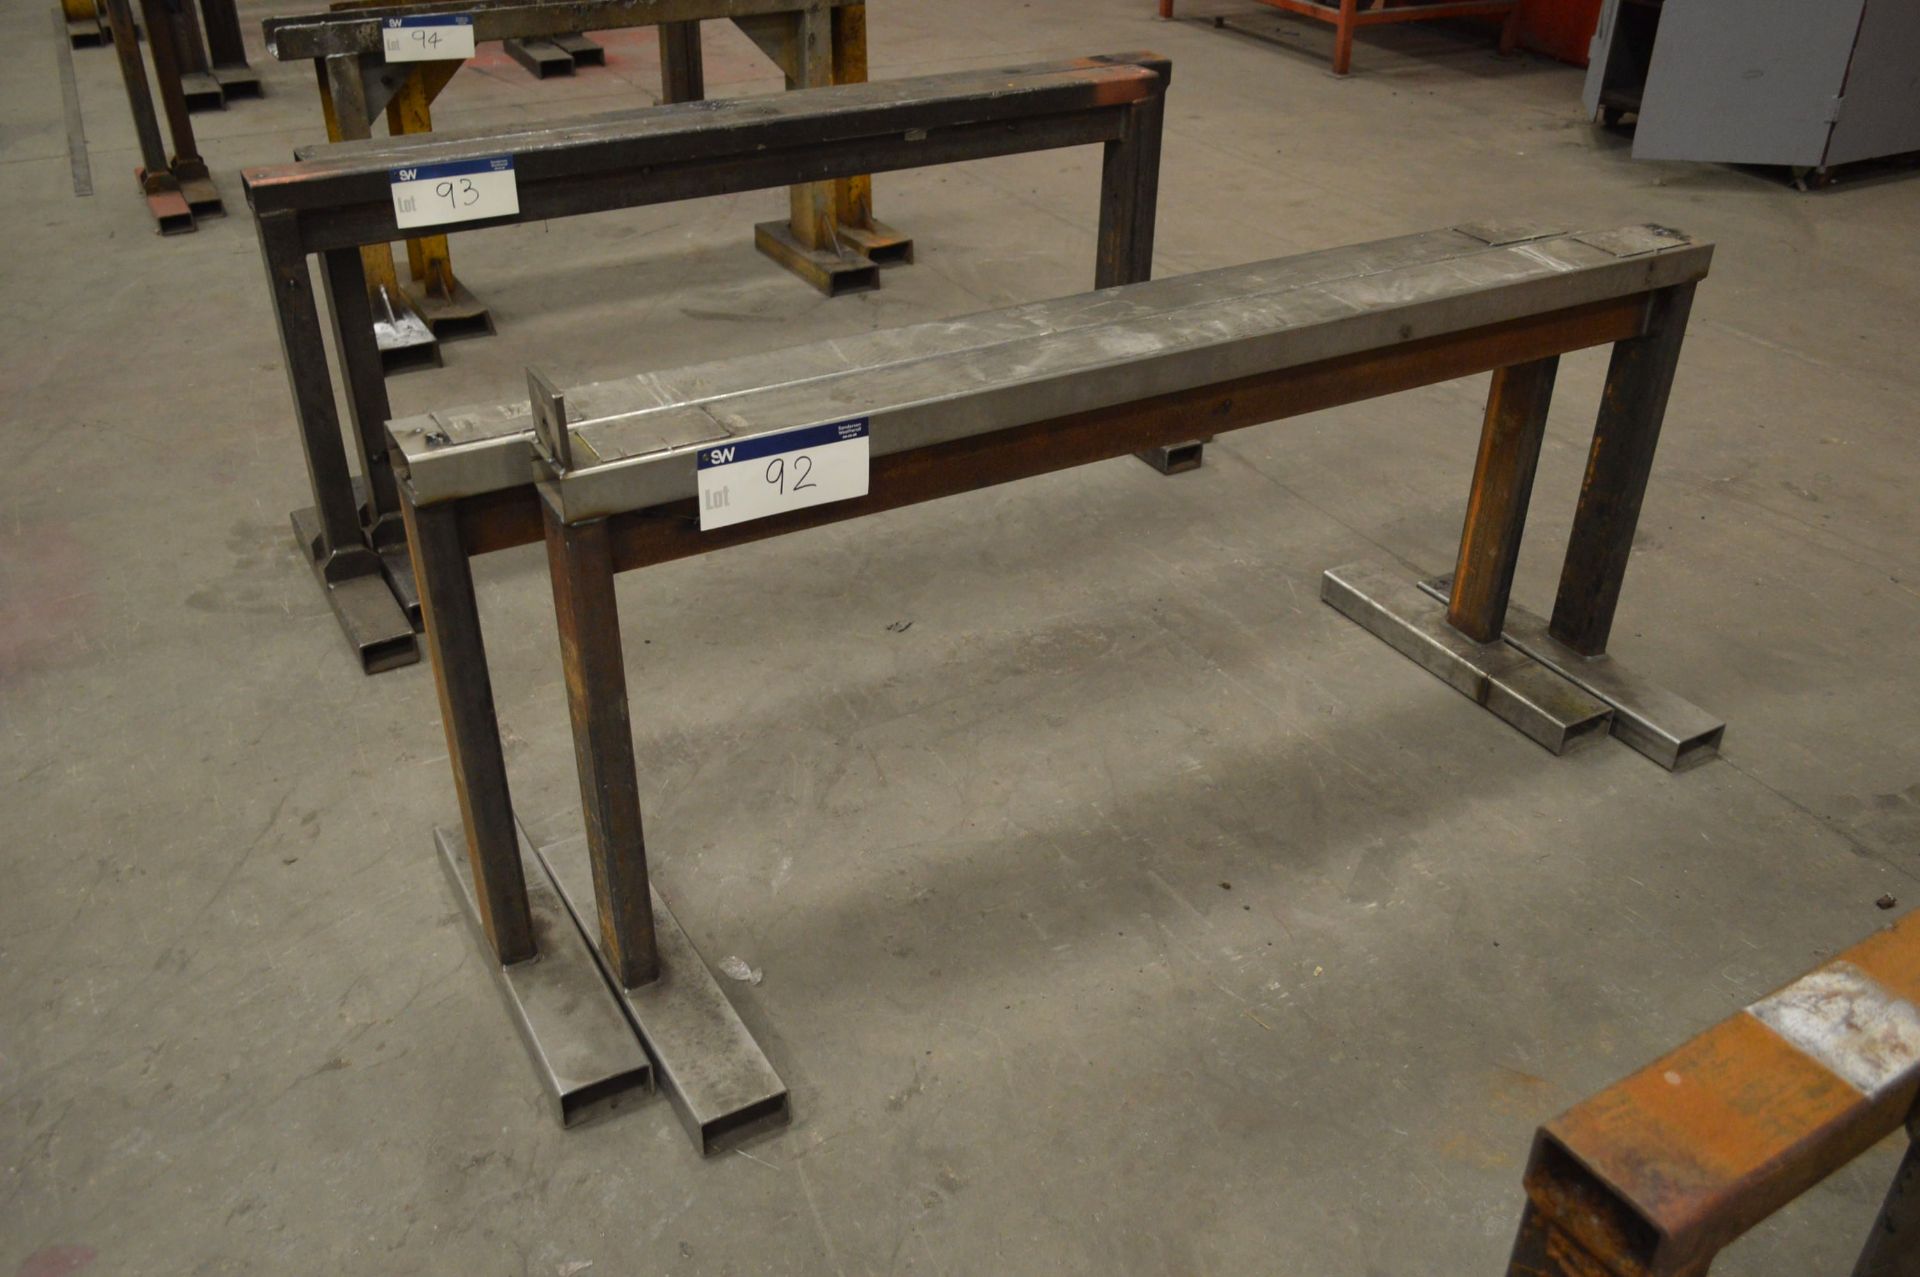 One Pair of Steel Trestles, each approx. 1.8m x 800mm high